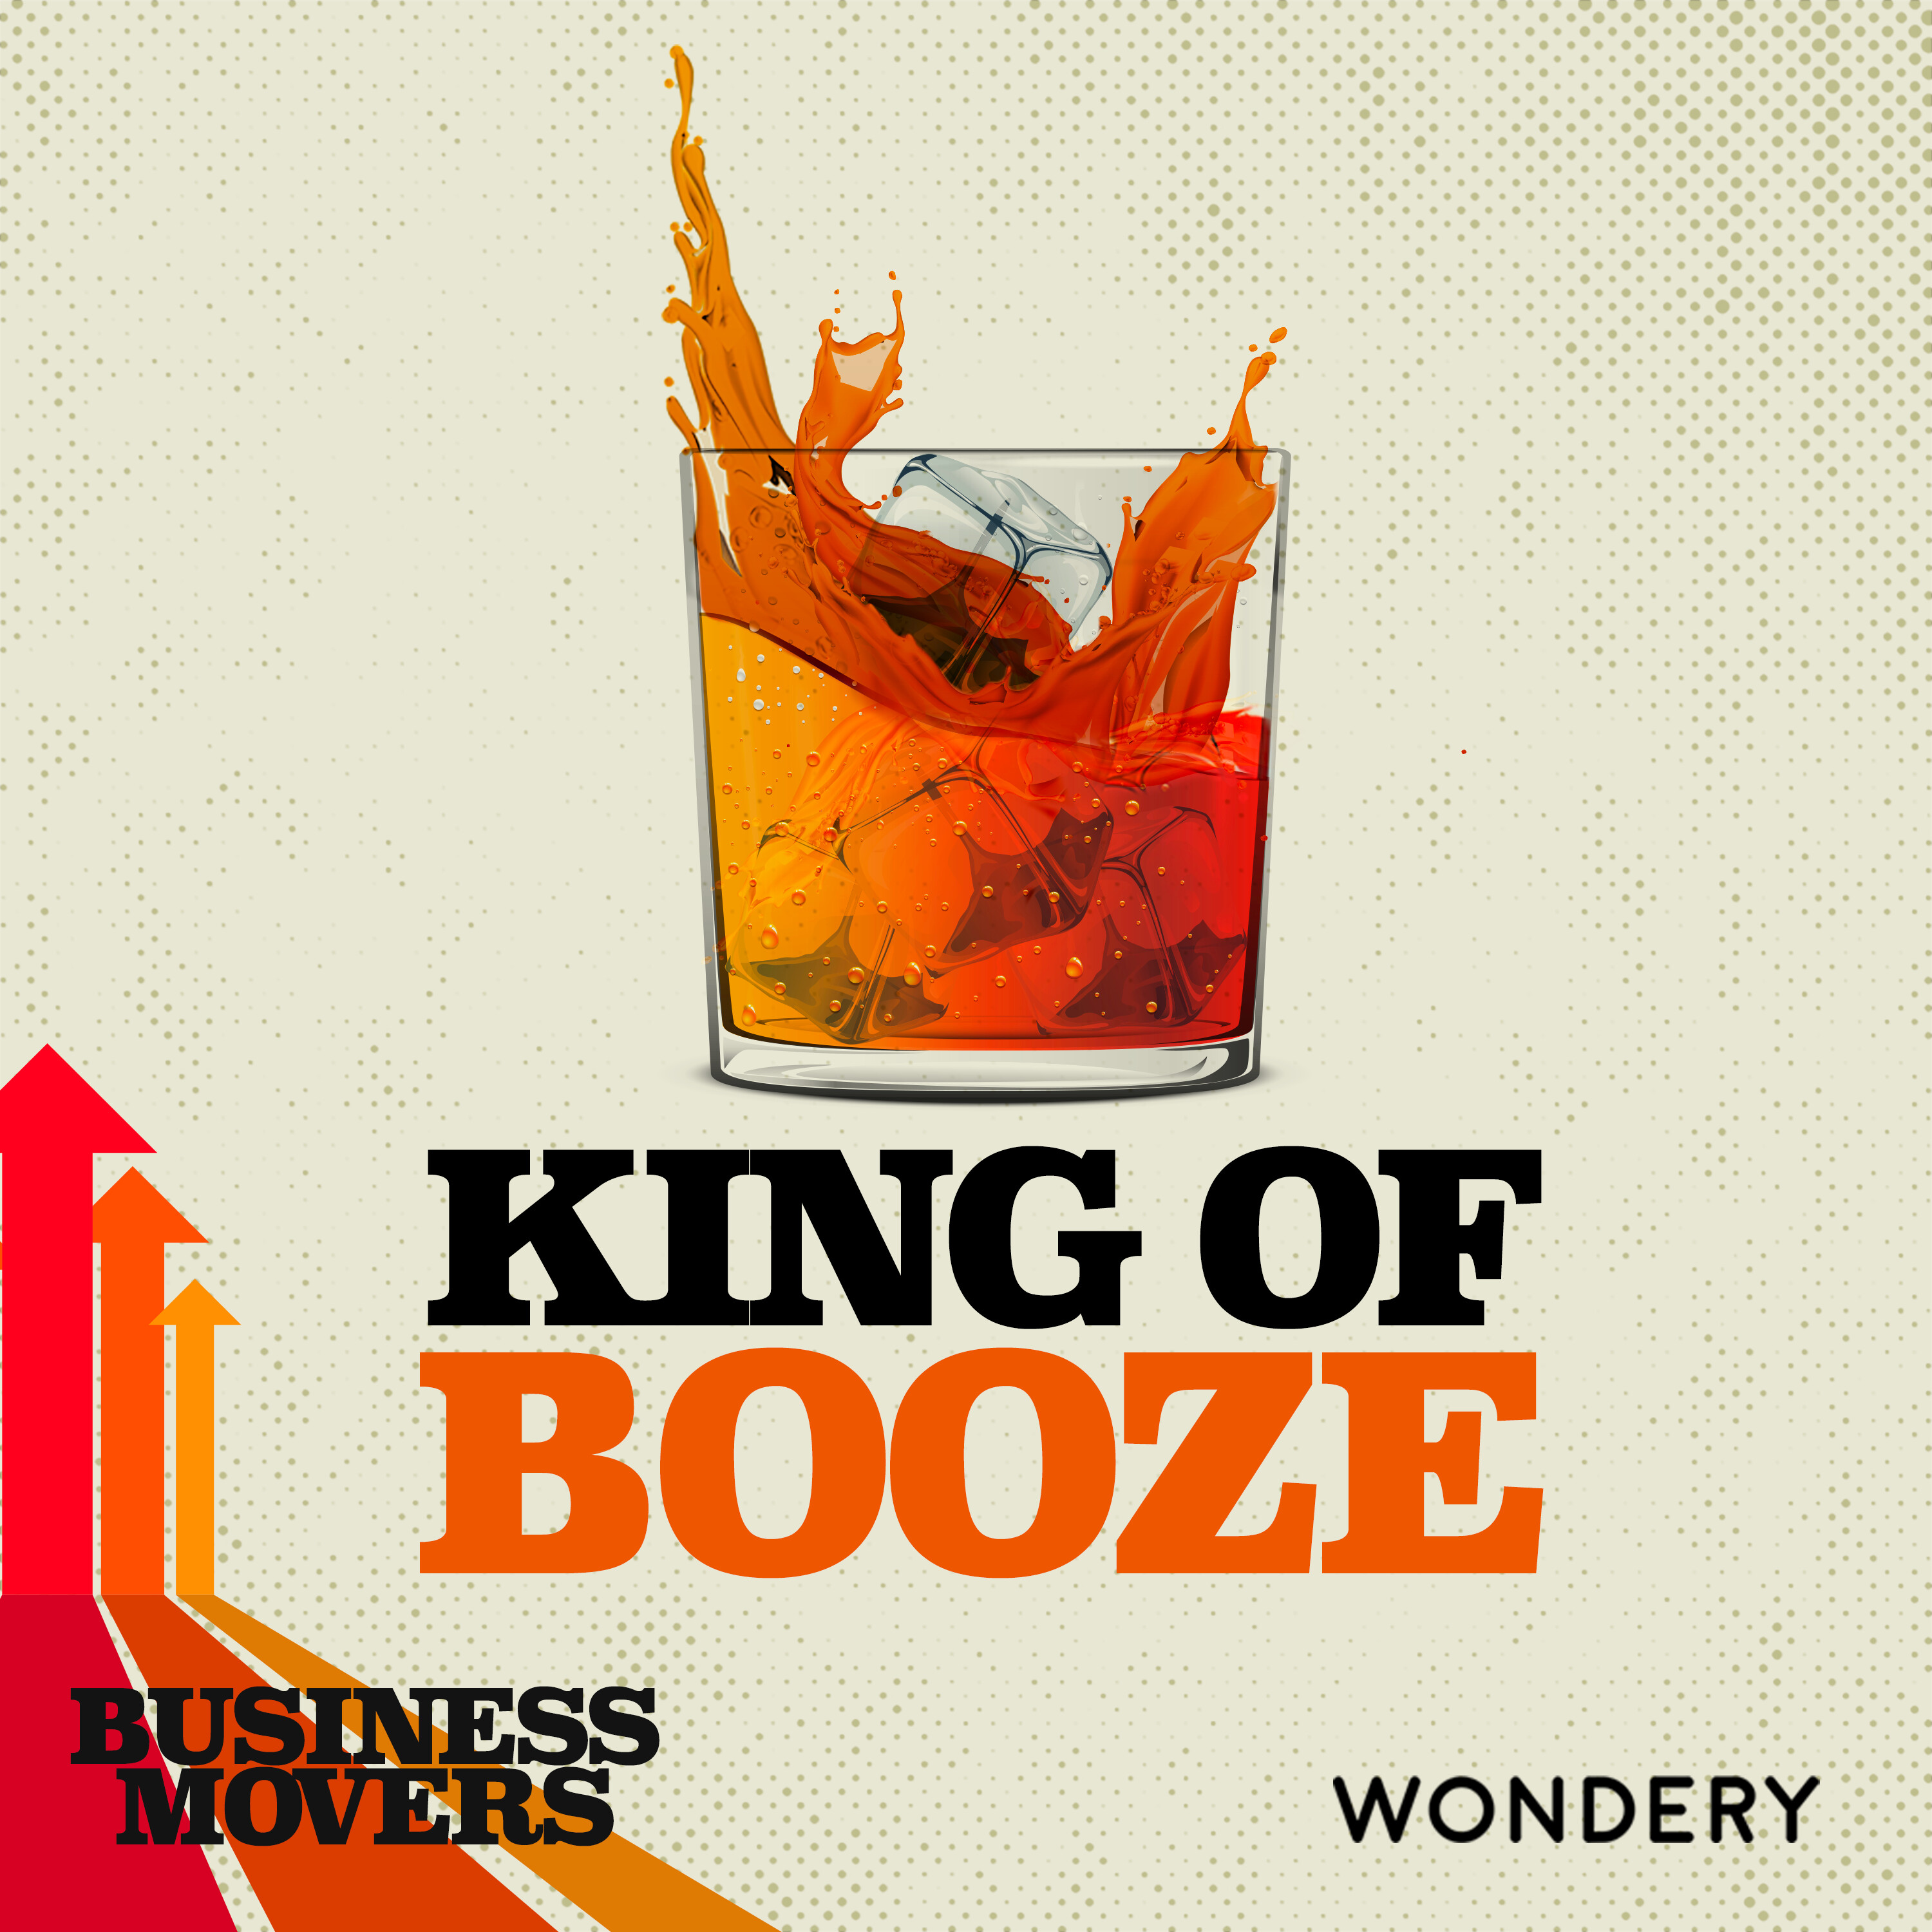 The King of Booze | Boats Against the Tide | 4